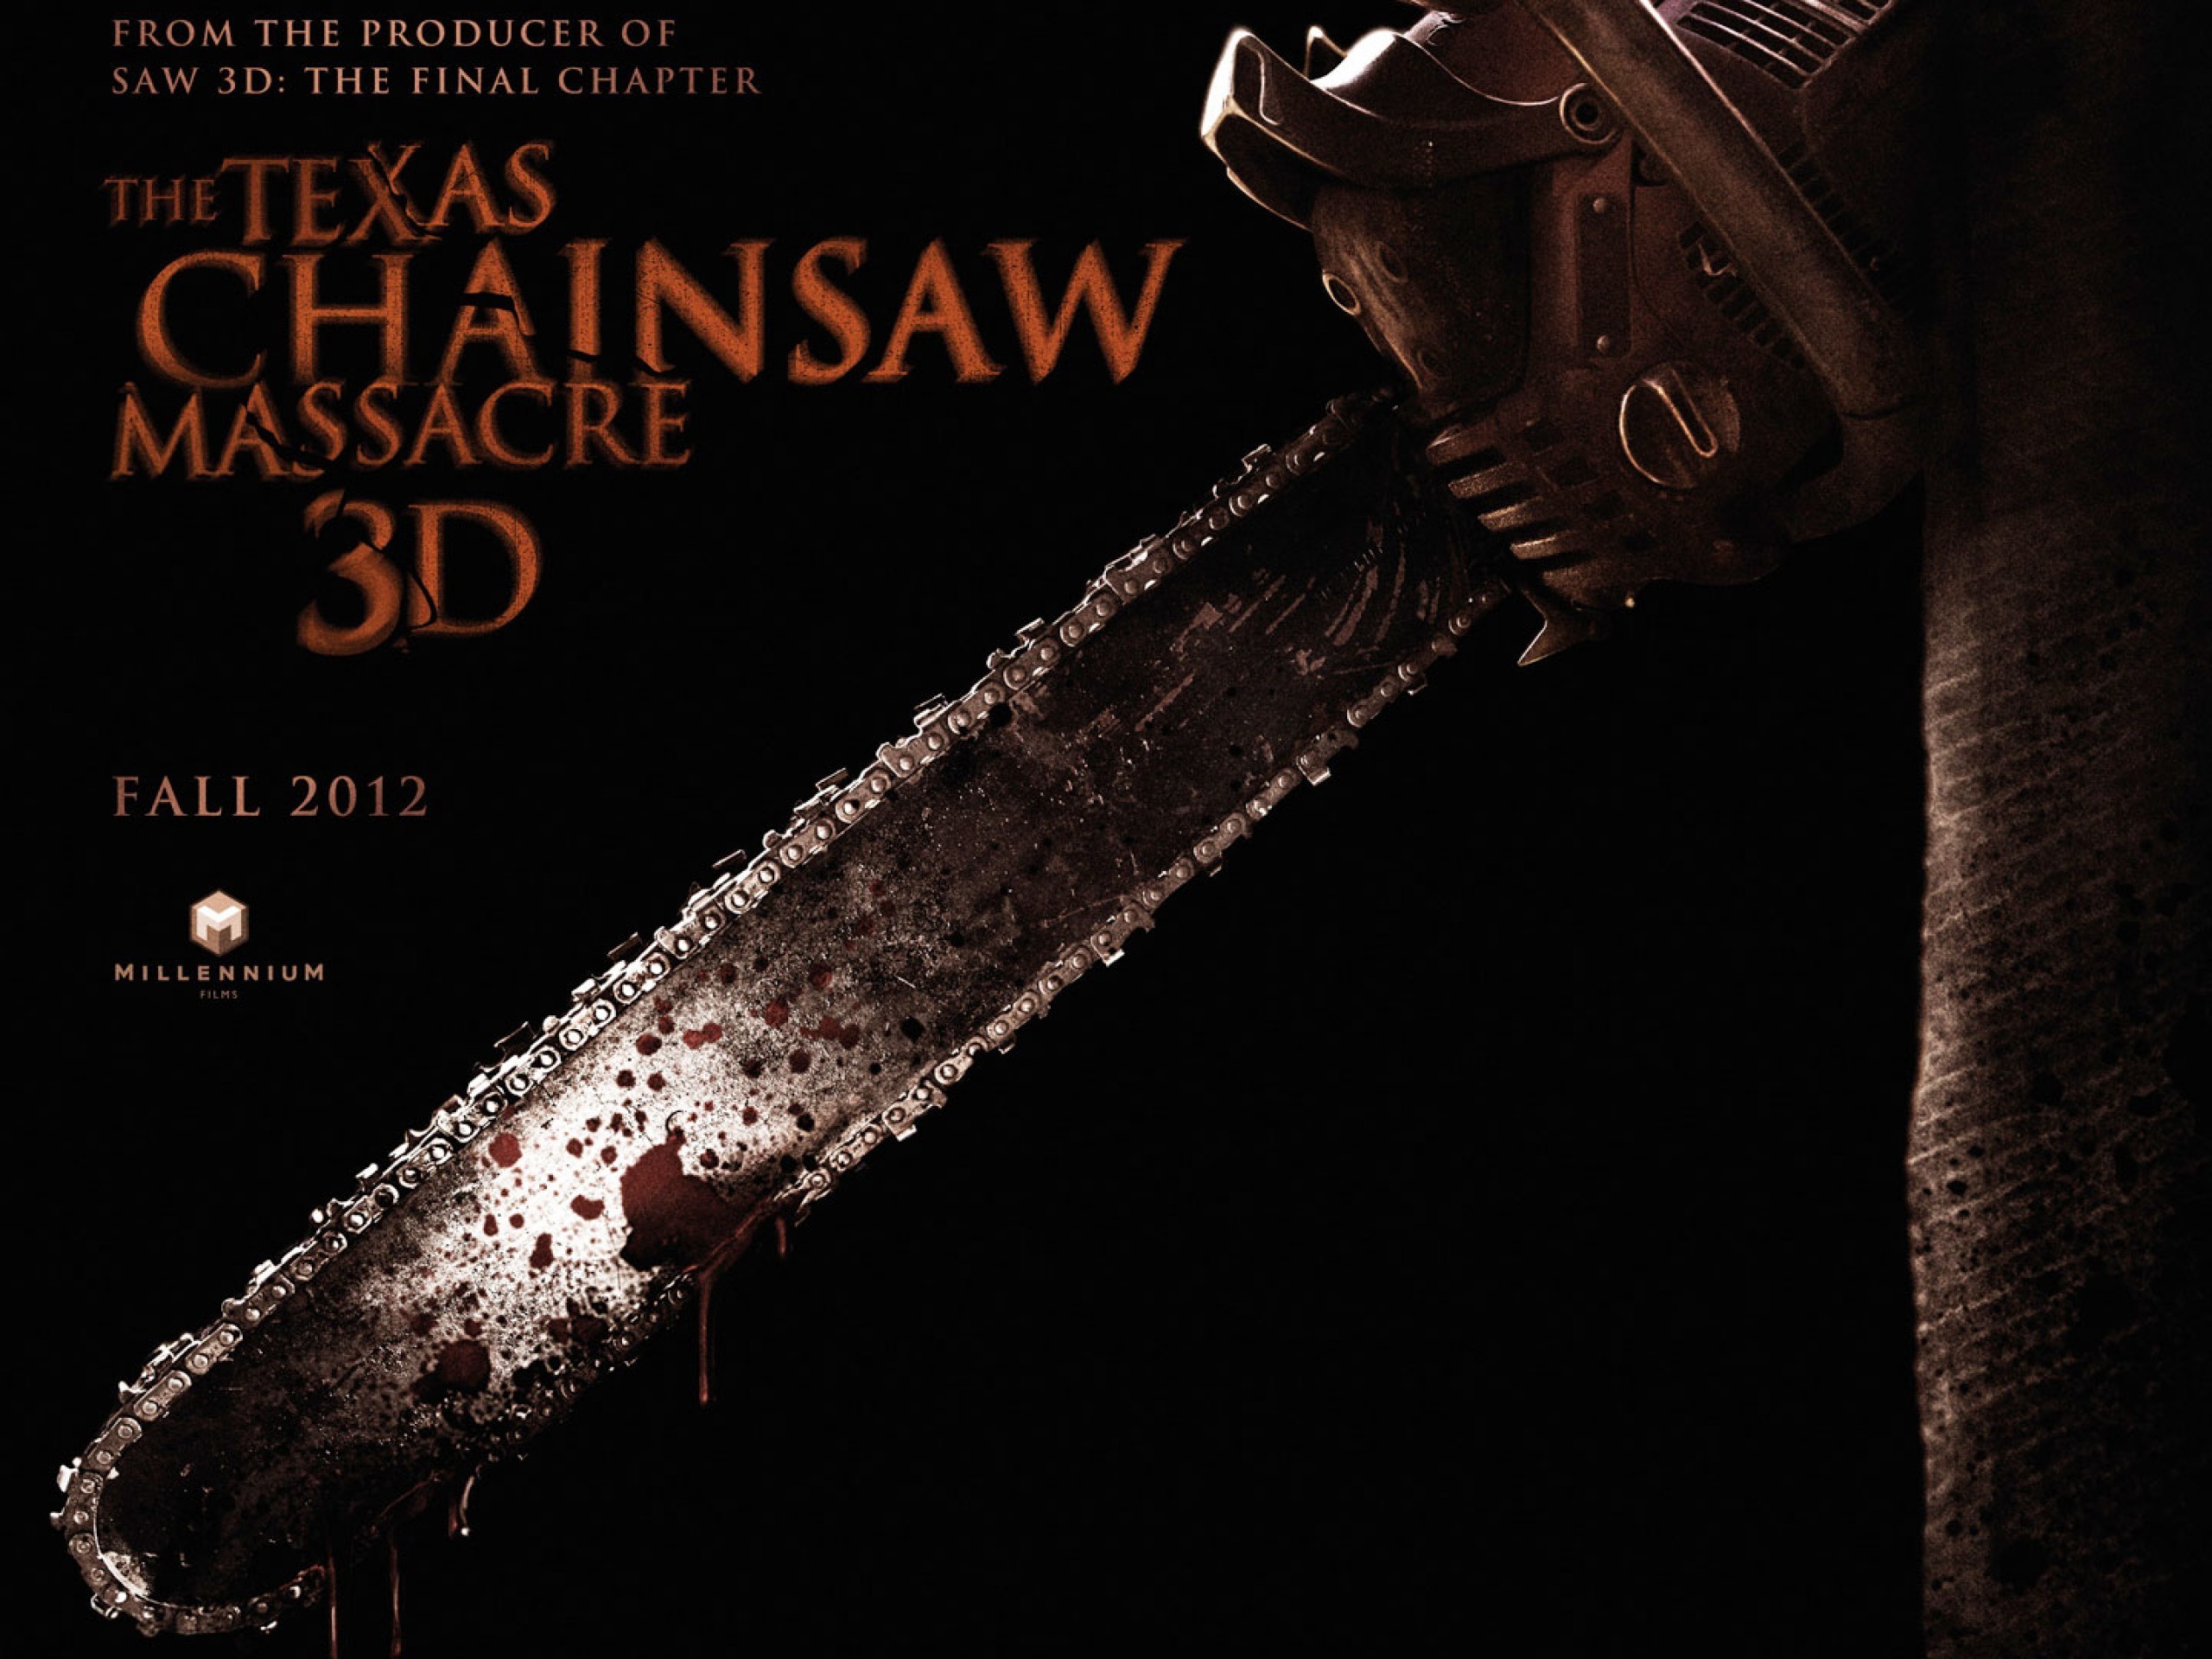 2560x1920 Texas Chainsaw Massacre 3D 2013 Movie - New HD Wallpapers